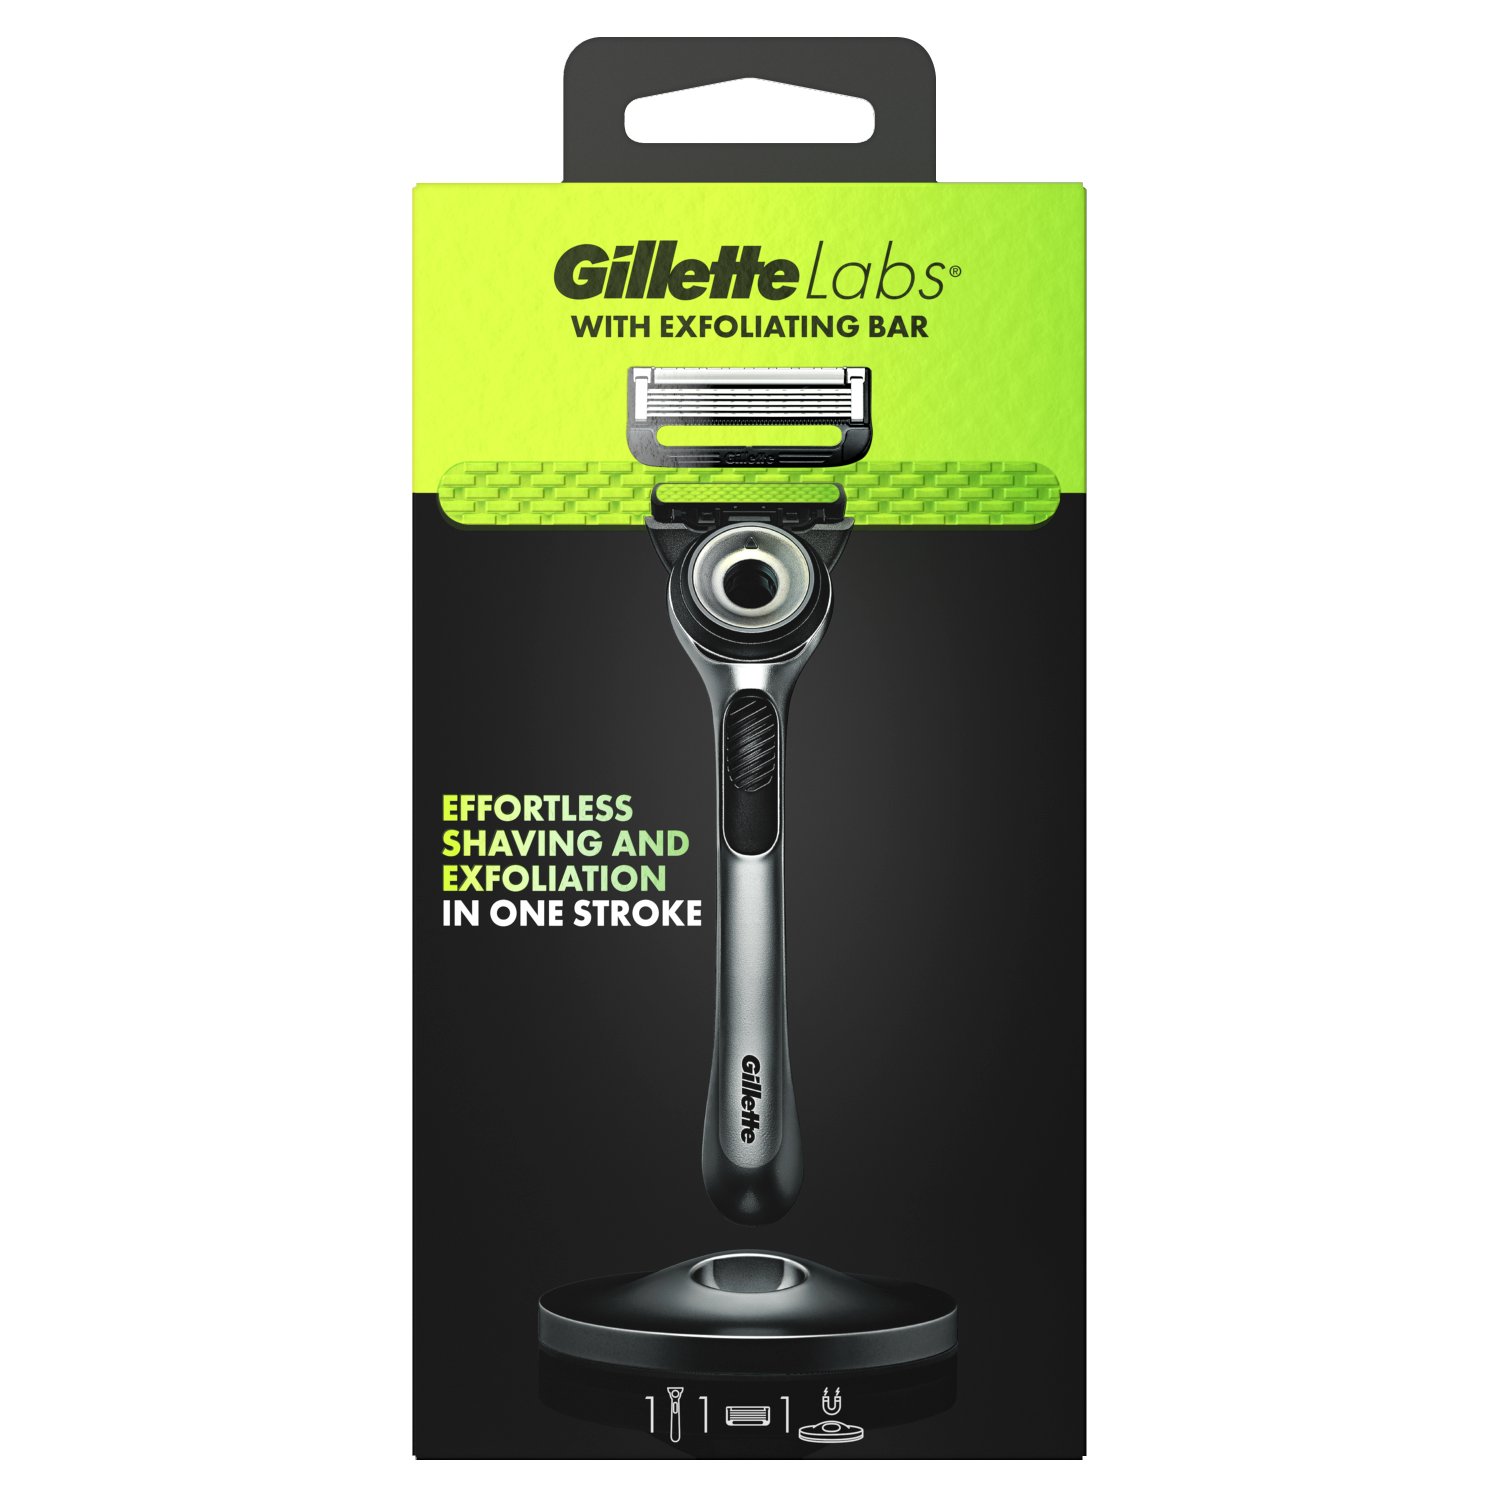 Gillette Labs Exfoliating Razor With Magnetic Stand (1 Piece)